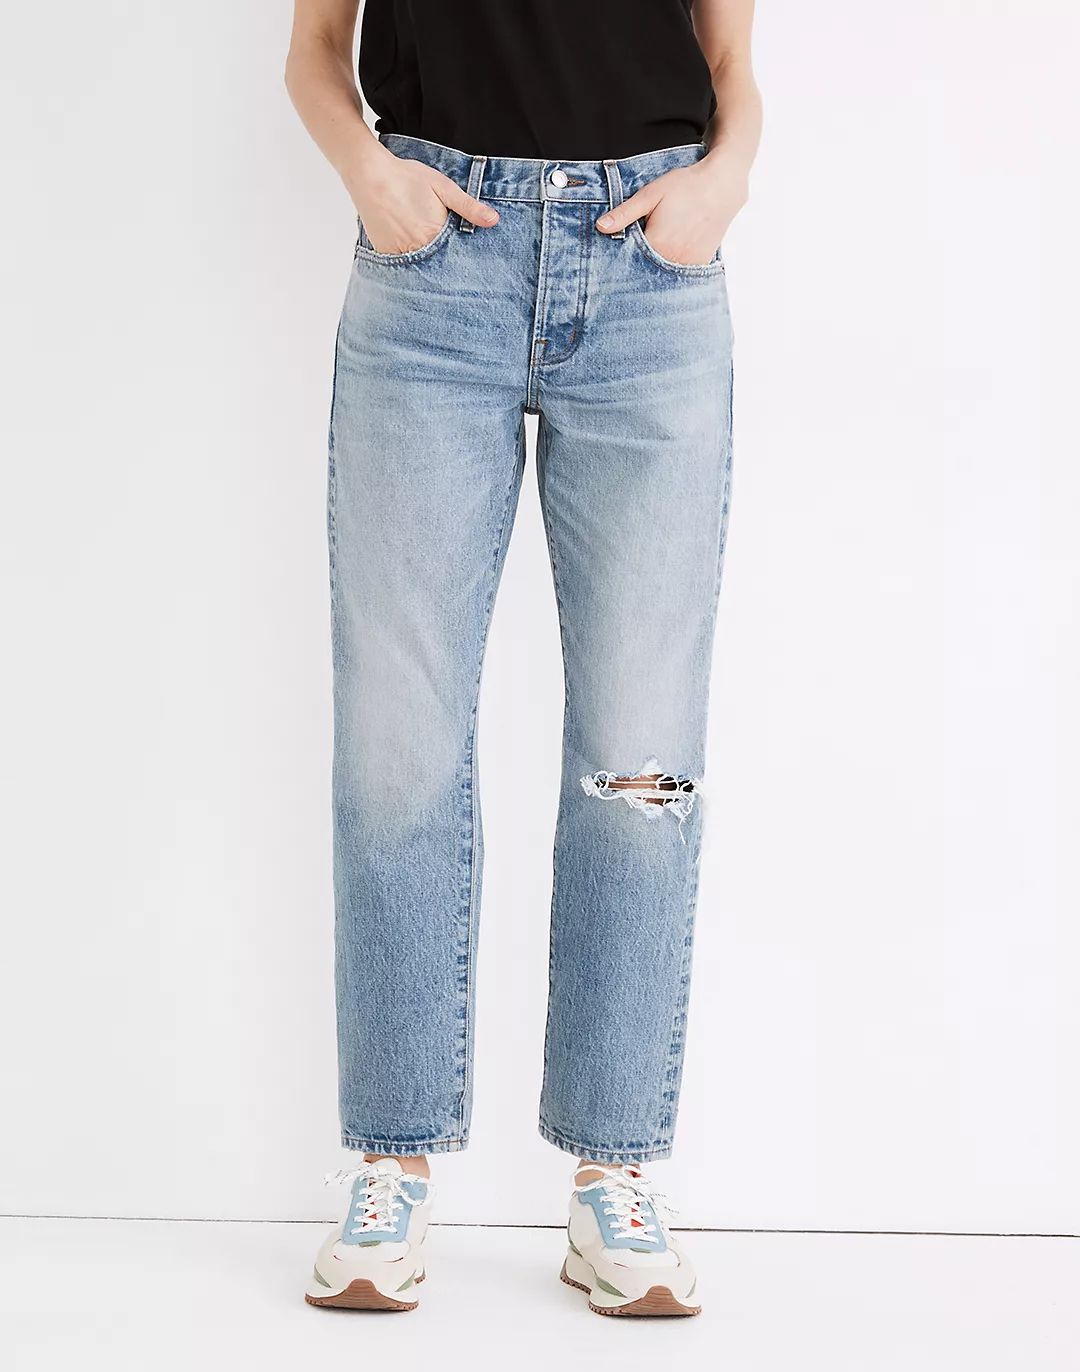 Rivet & Thread Low-Rise Vintage Straight Jeans: Selvedge Edition | Madewell